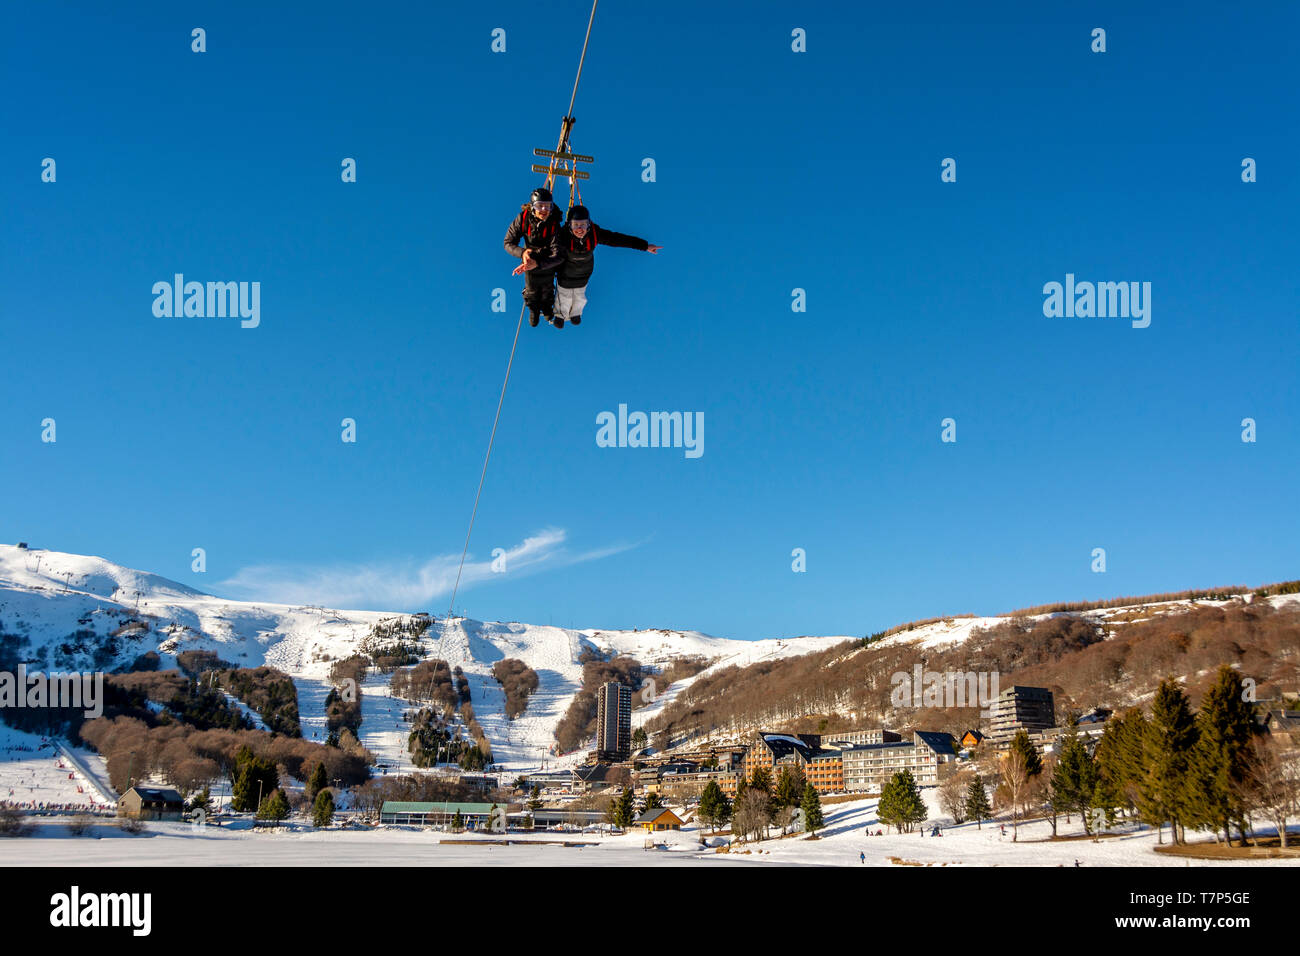 Persons on Zip wire line in Super Besse ski resort,  Regional Nature Park of Volcans d'Auvergne, Puy de Dome, Auvergne, France Stock Photo